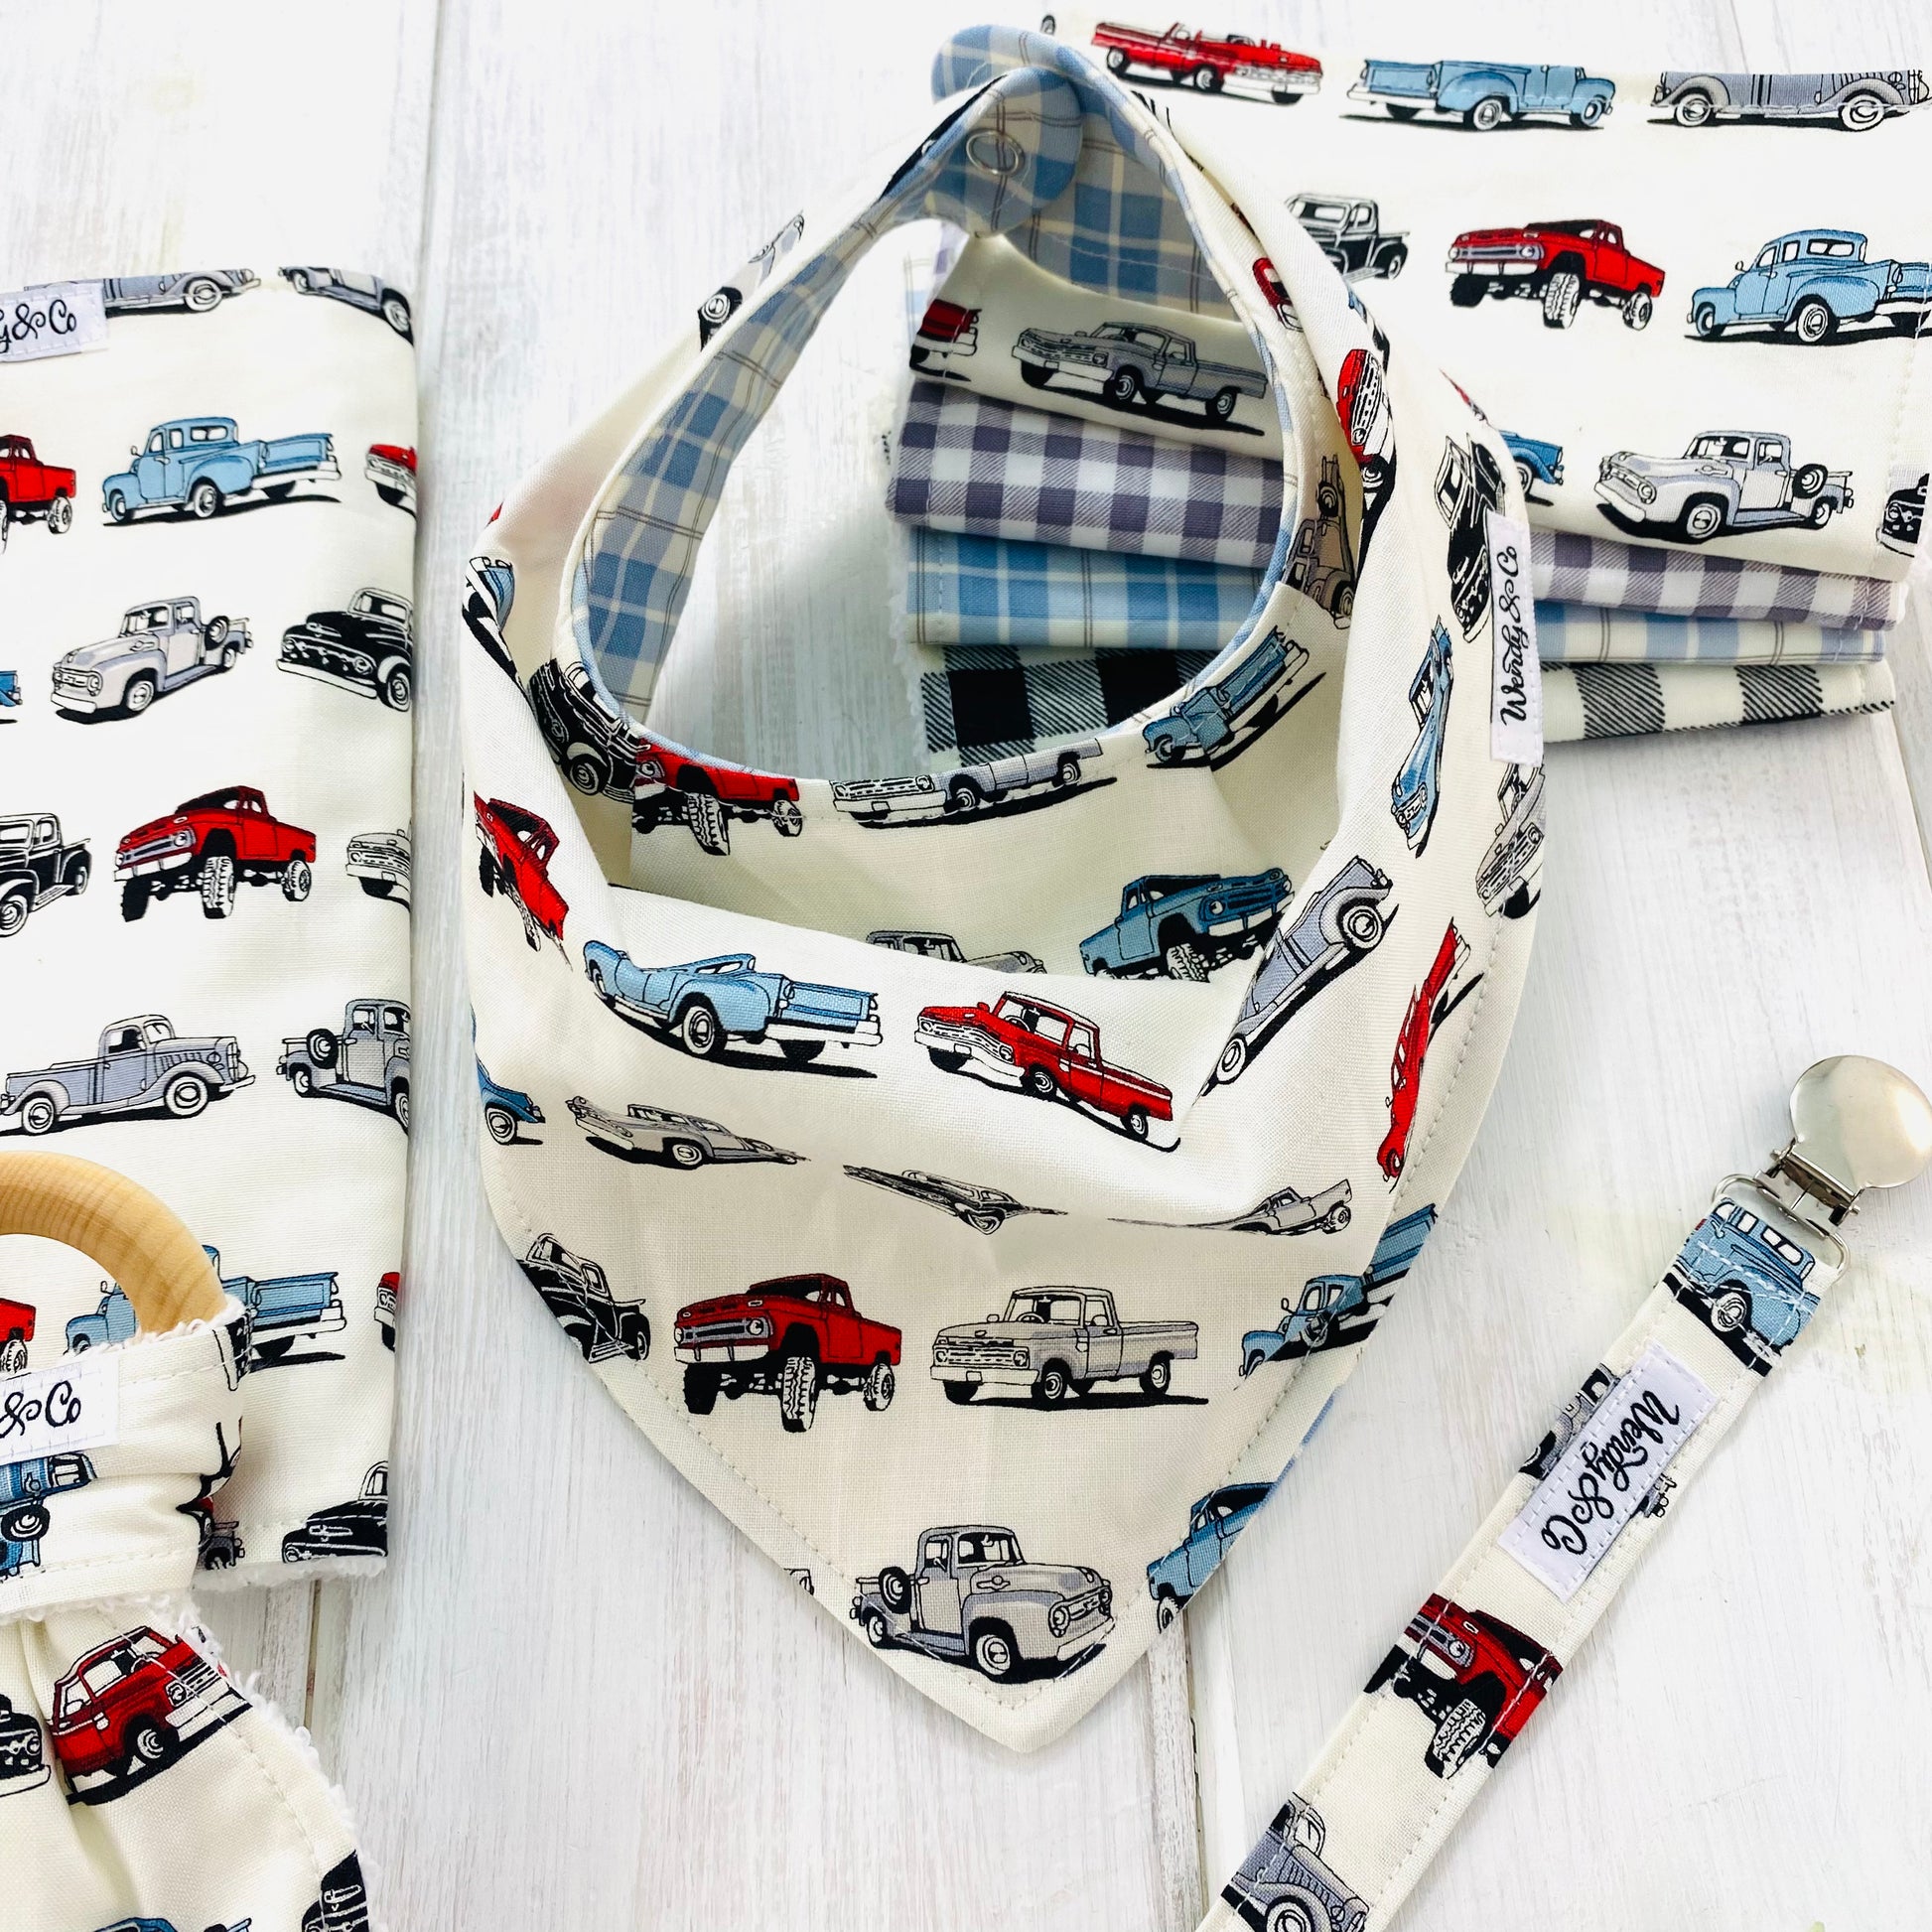 Reversible baby bib with blue plaid on one side and classic trucks on the other side.